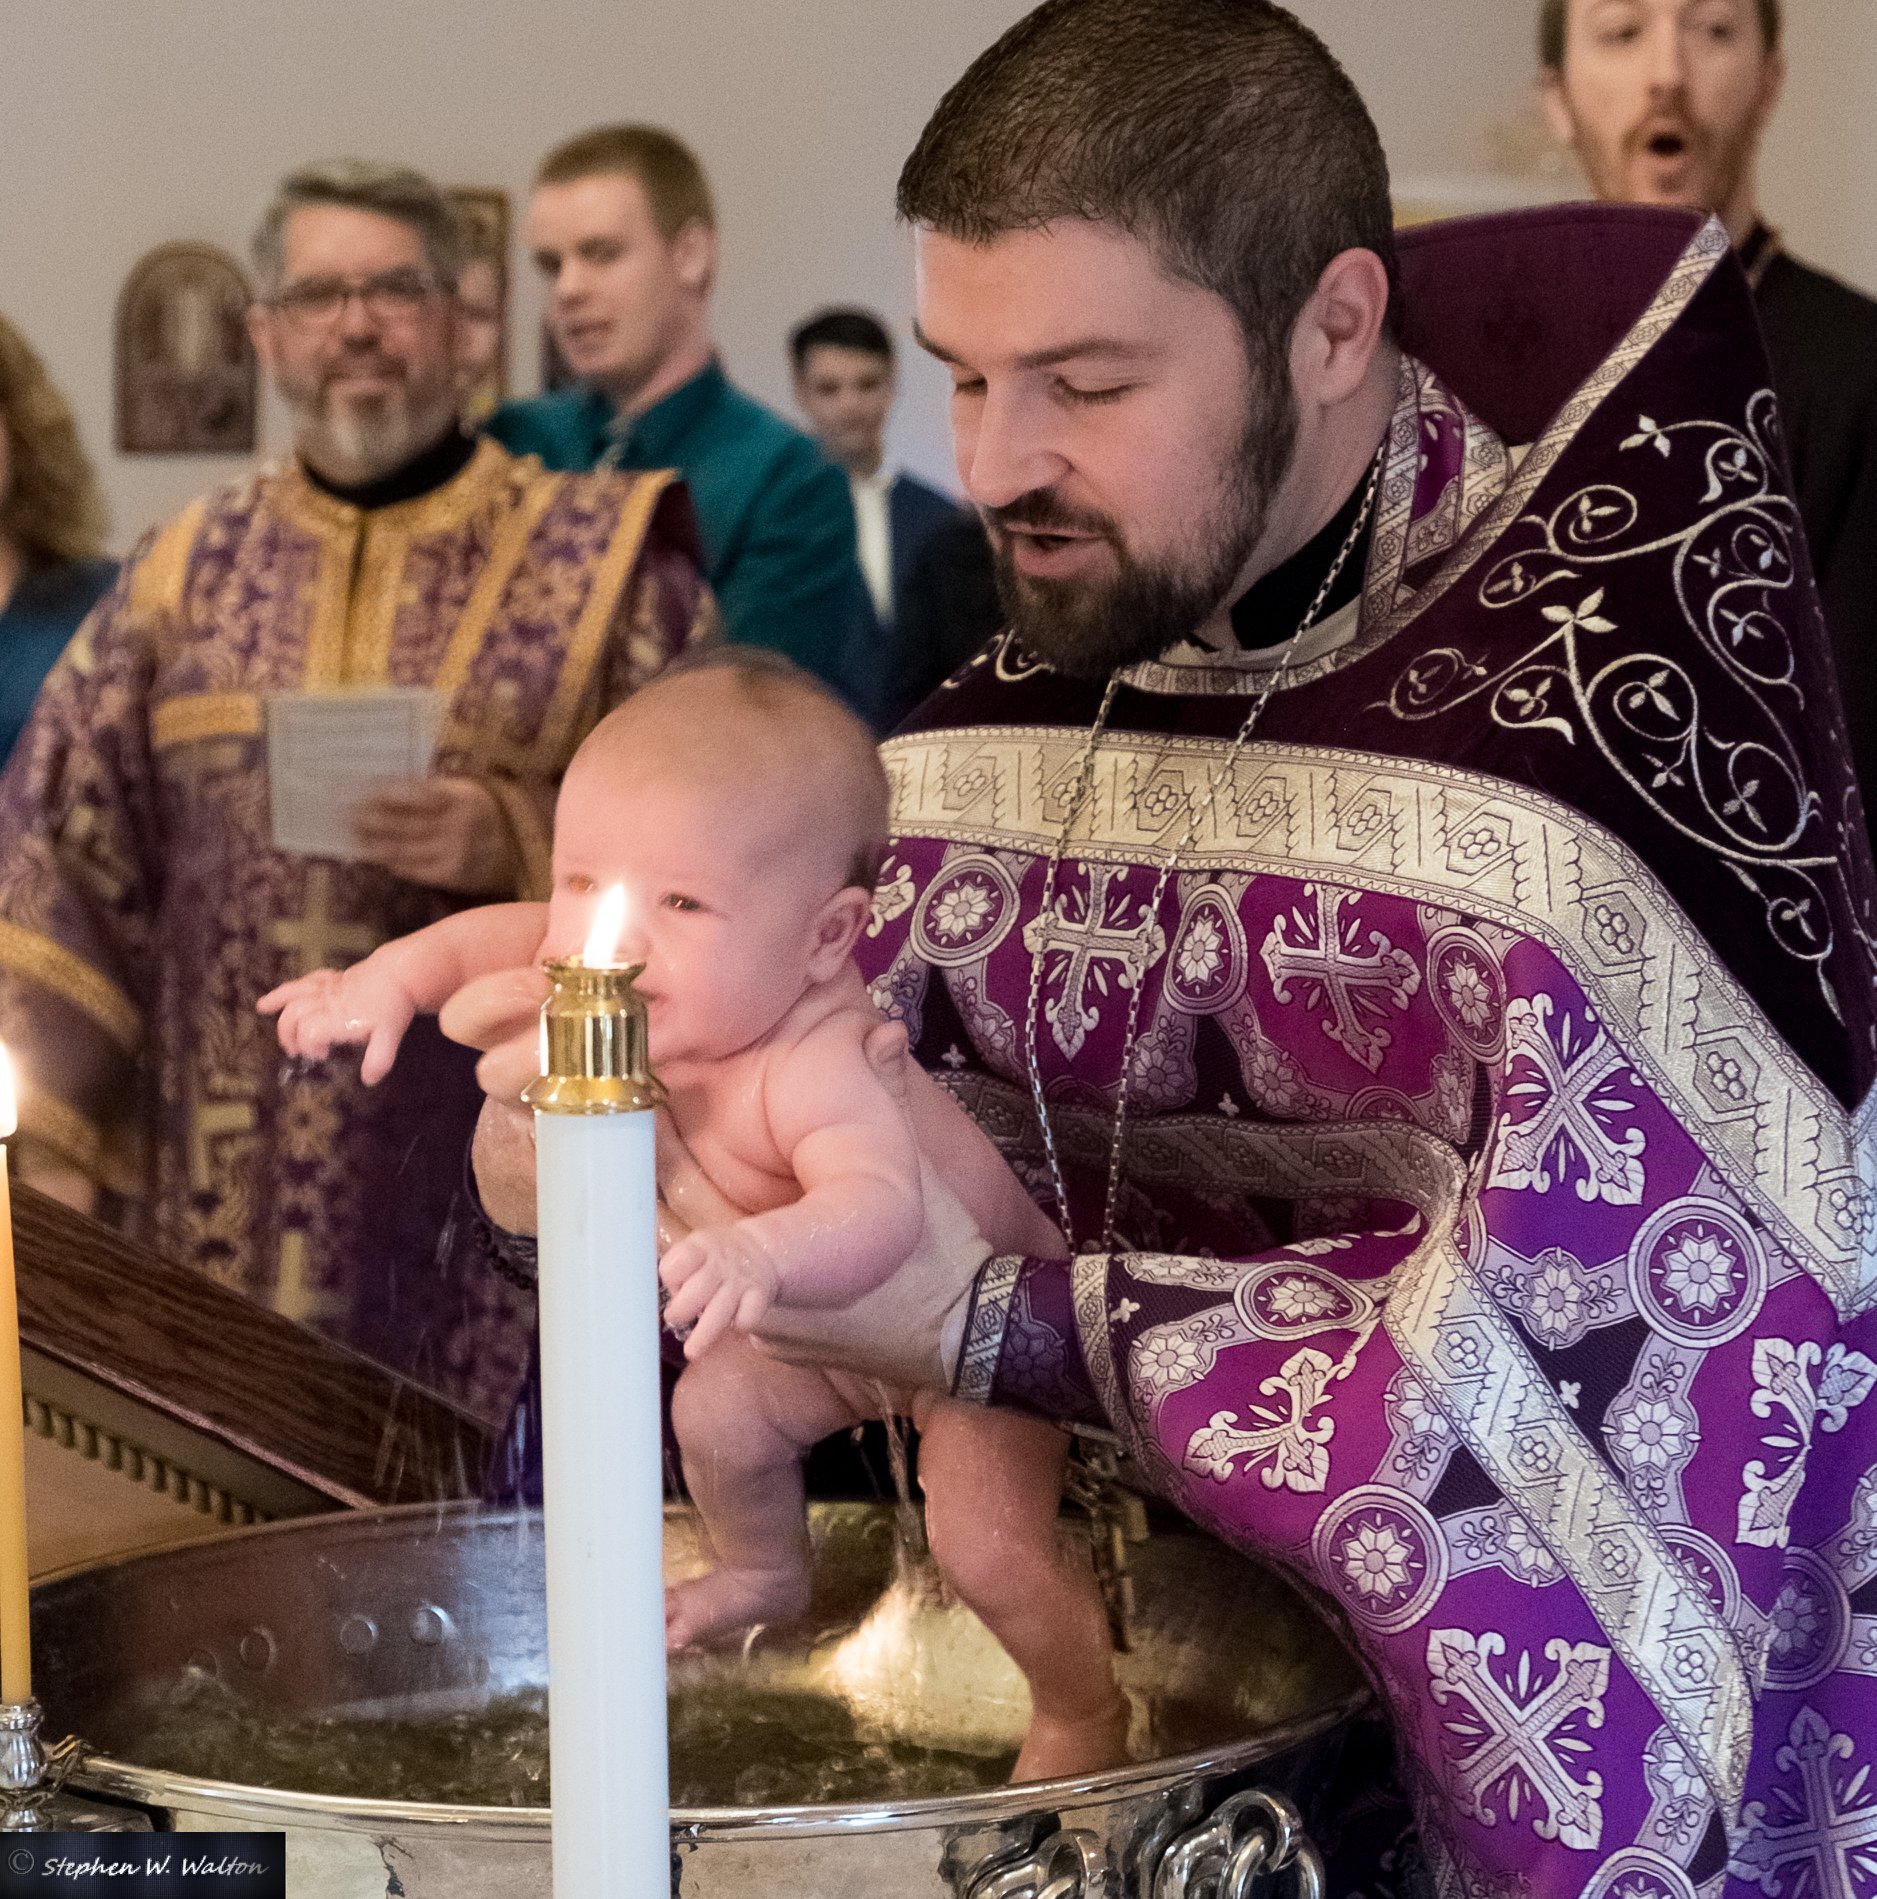  priest baptizing a infant with people in background smiling 